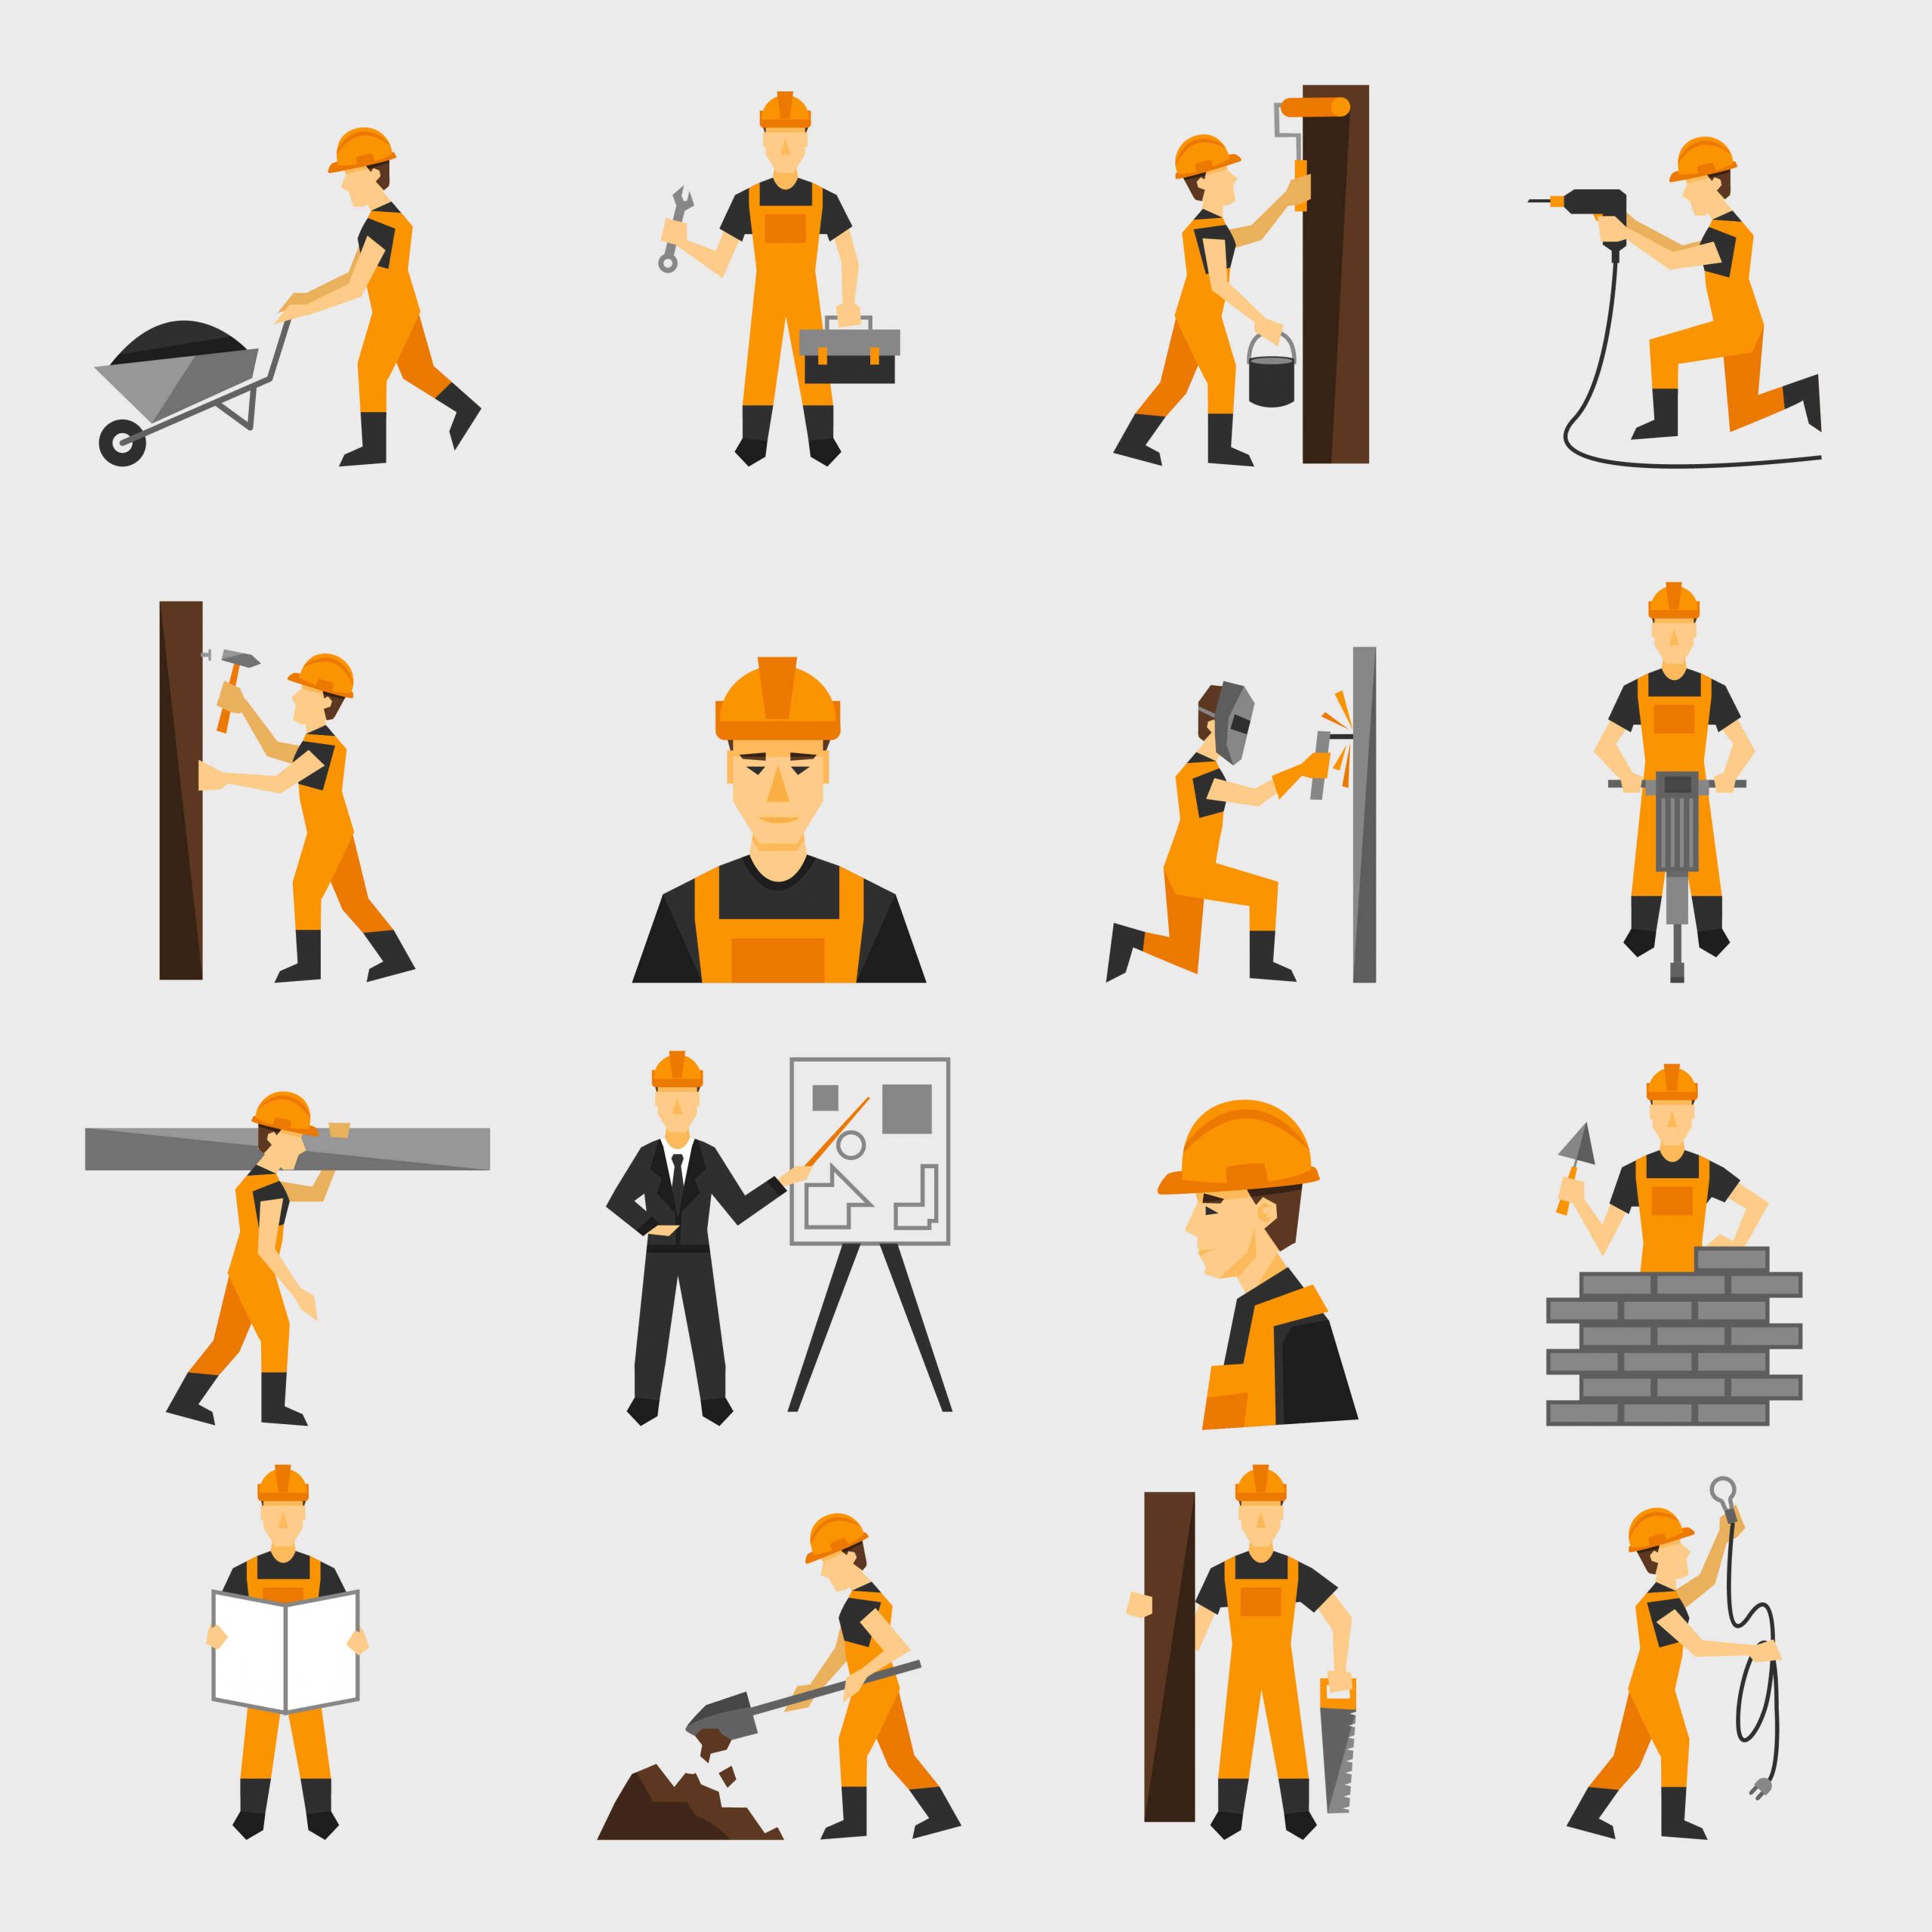 CONTRACTOR'S ALL RISKS INSURANCE policy - vector image of contractors doing different tasks